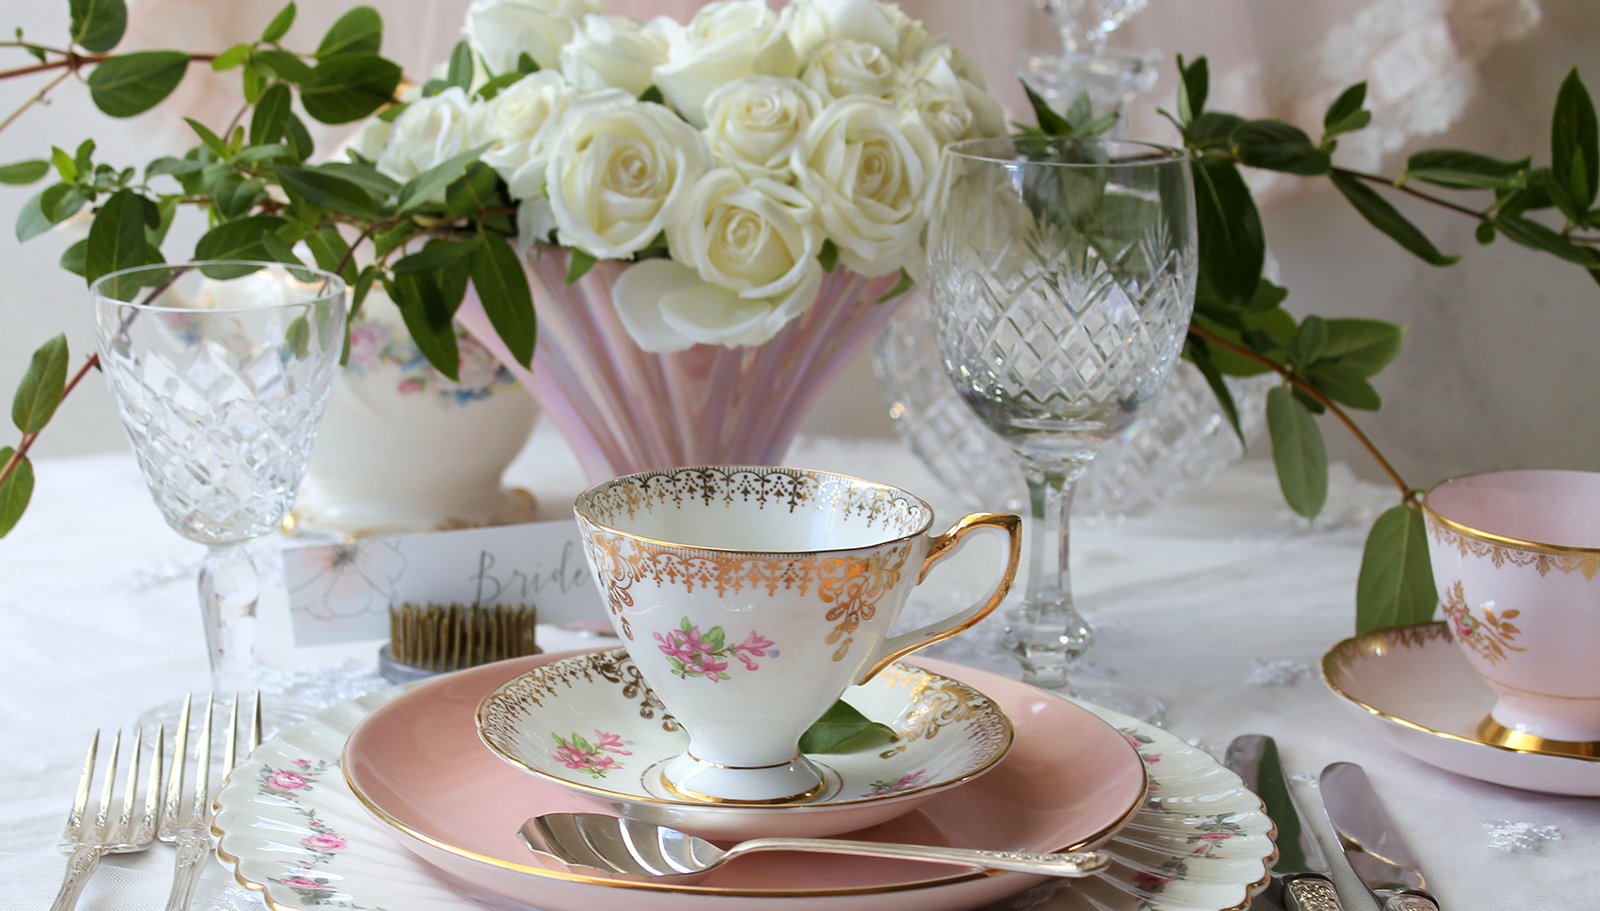 Vintage and antique china